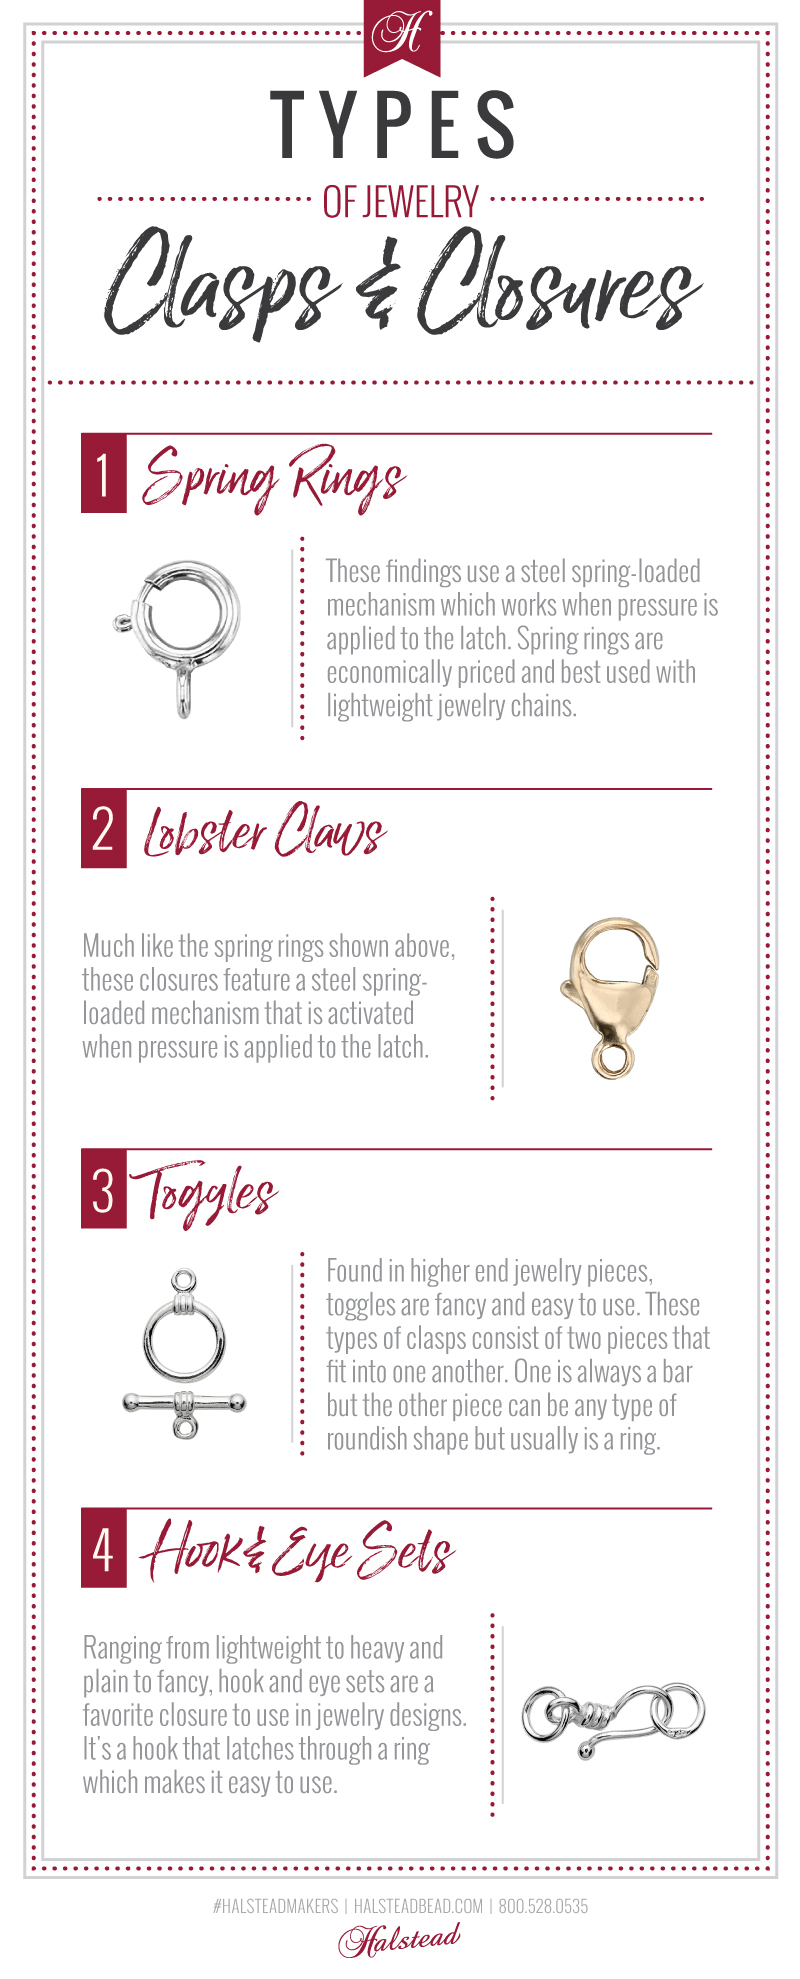 Types of Clasps & Closures Infographic: Spring Rings, Lobster Claws, Toggles, Hook Clasps